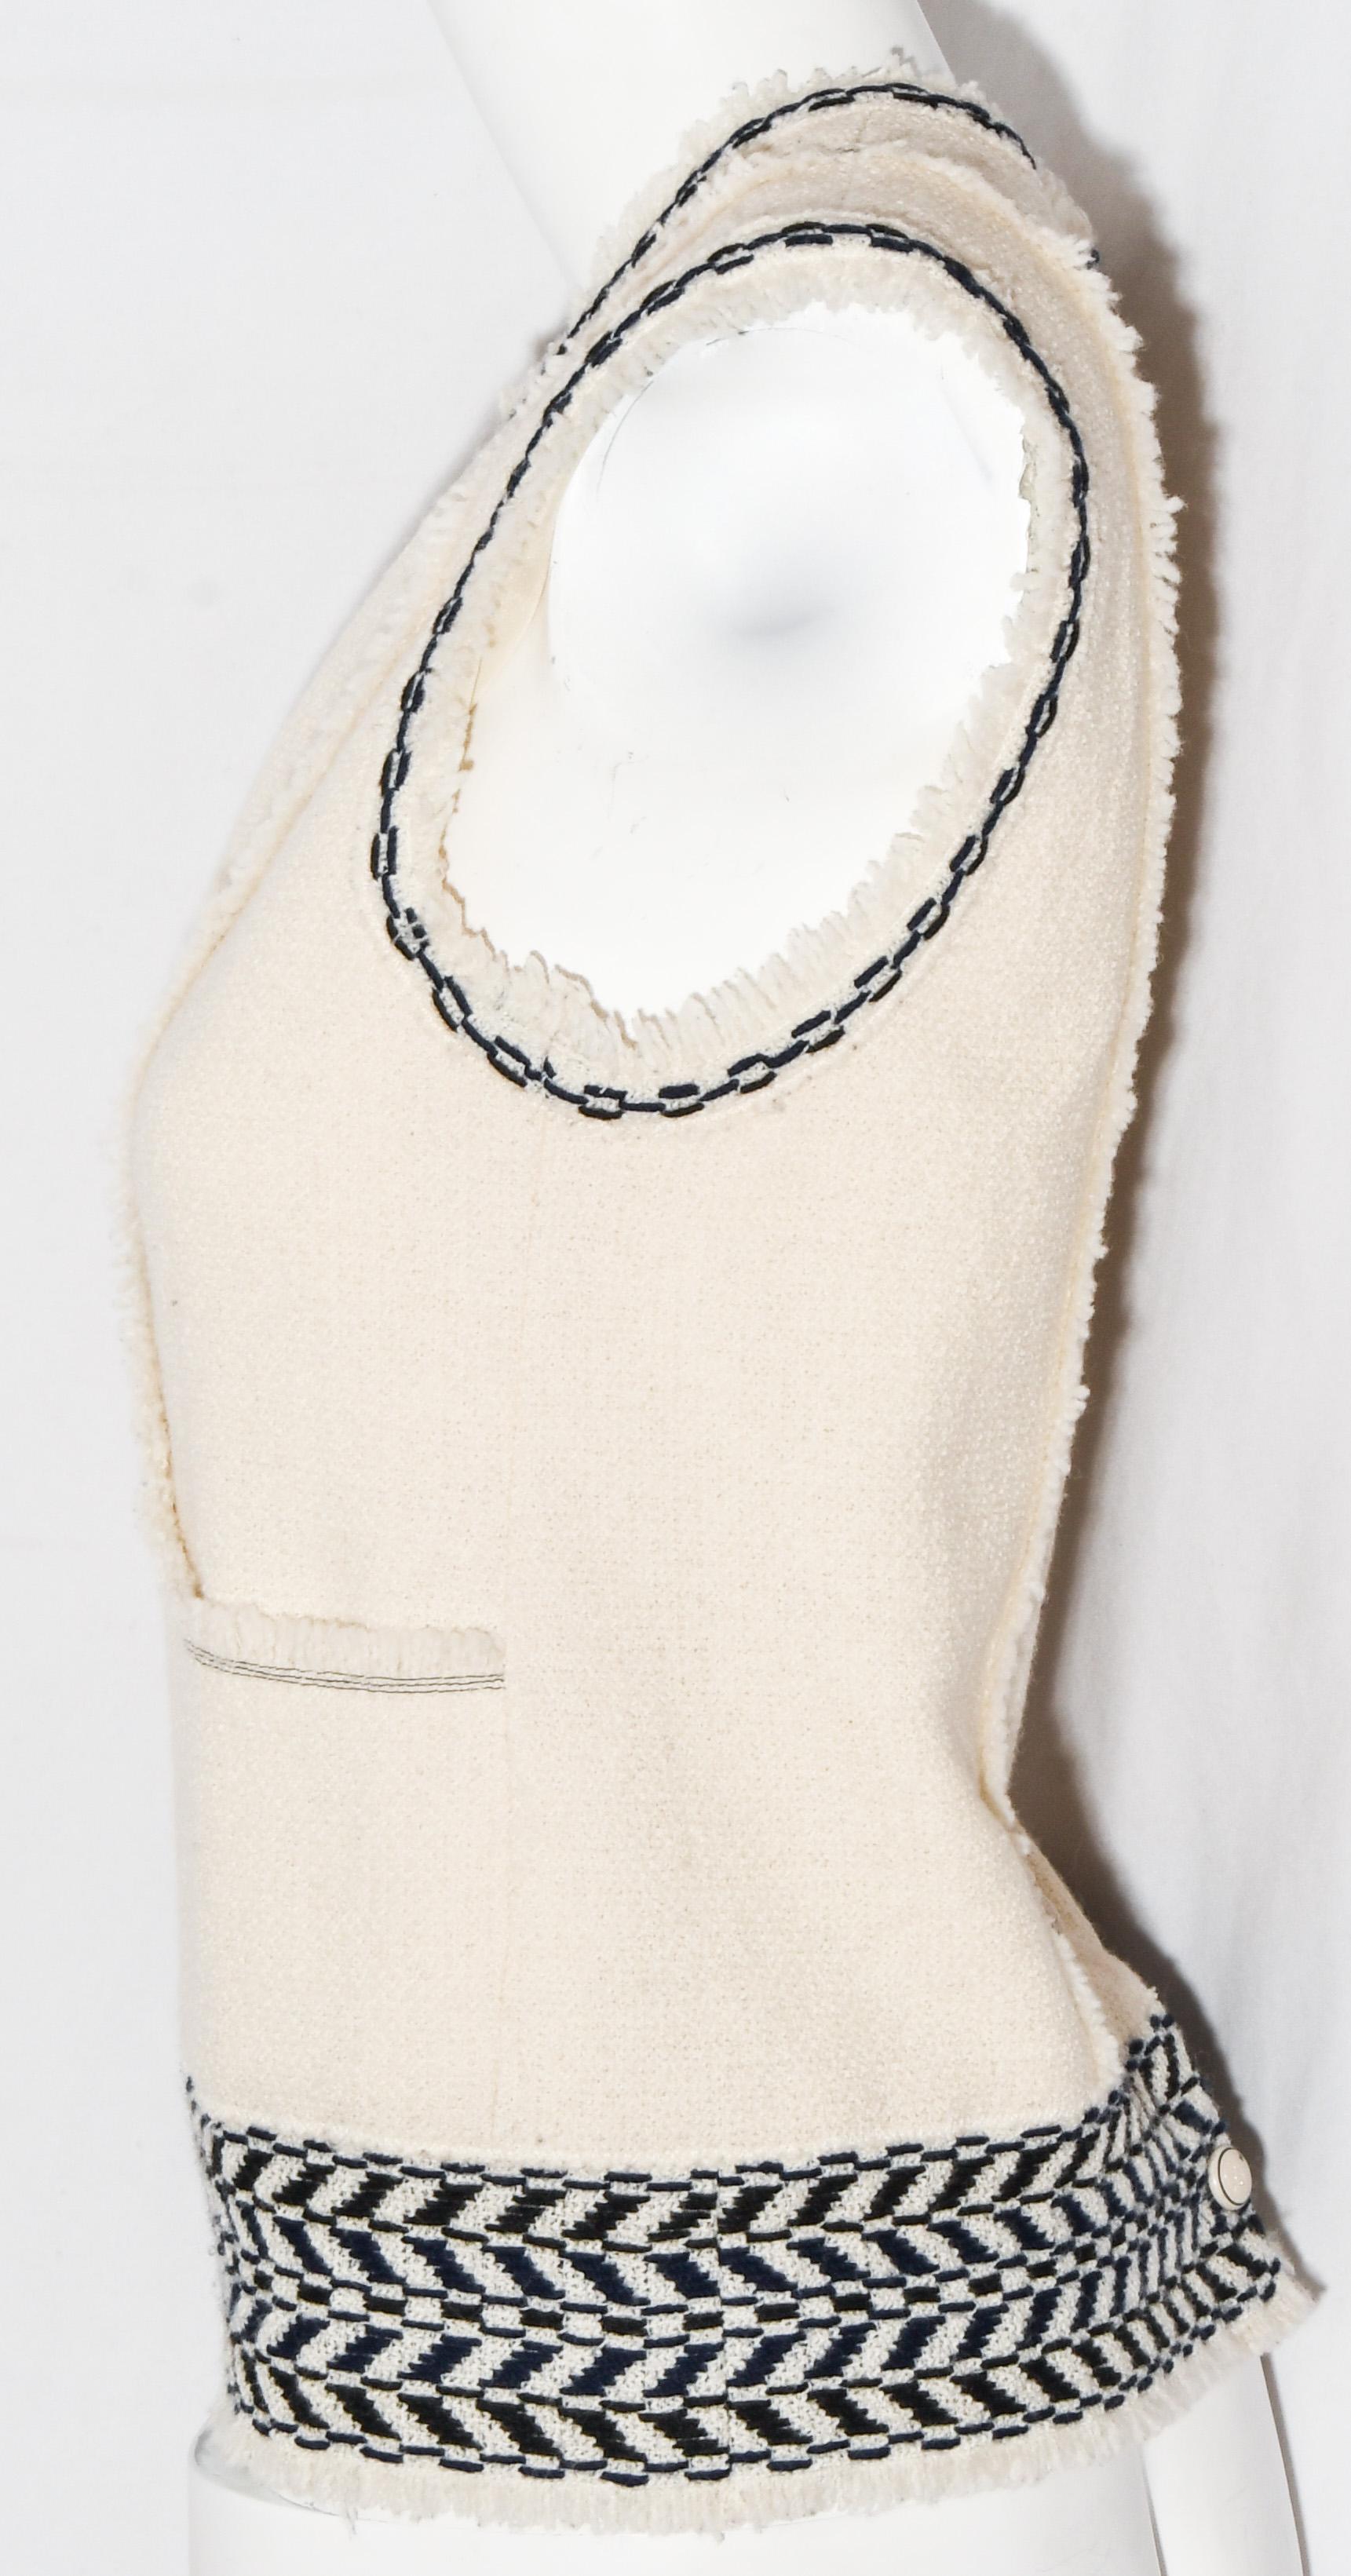 Chanel woven ivory wool sleeveless top features contrasting chain link stitch detailing in black and navy around round neckline and armholes.   With frayed fringe trim, around neckline and armholes but, also, including this trim on the hem and the